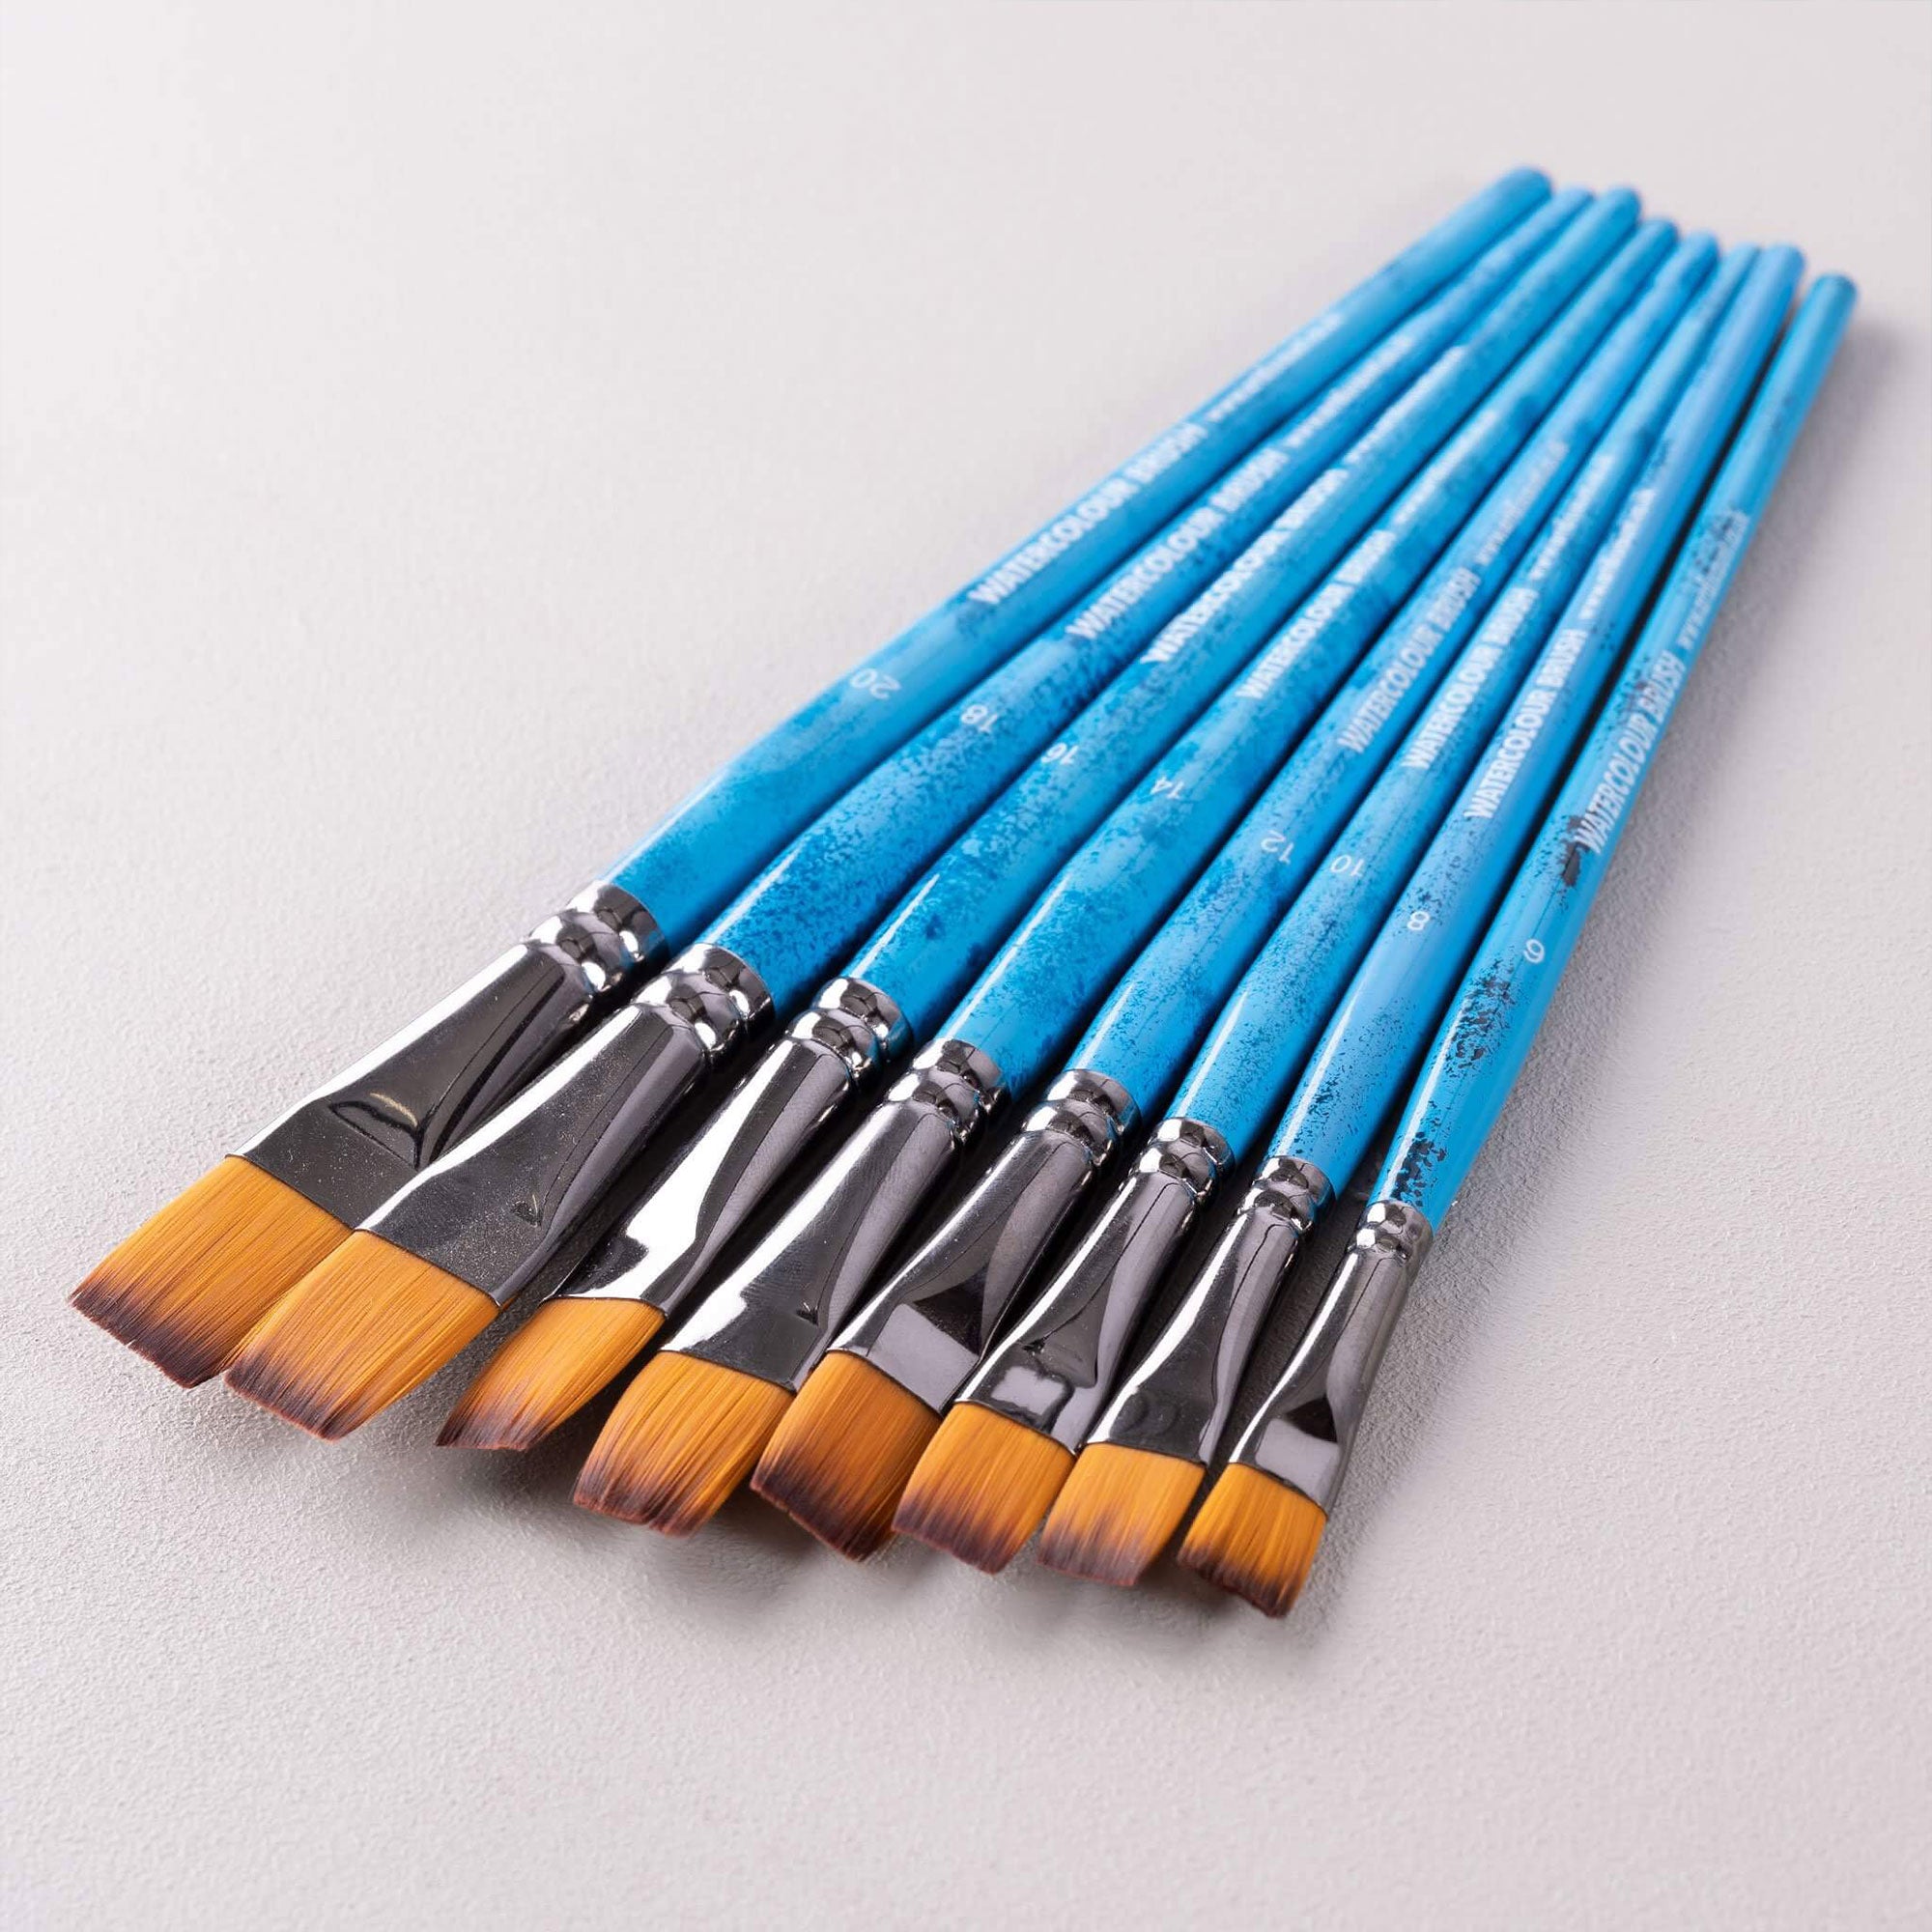 100 Pieces Kids Paint Brushes Set for Watercolor Oil Painting Flat